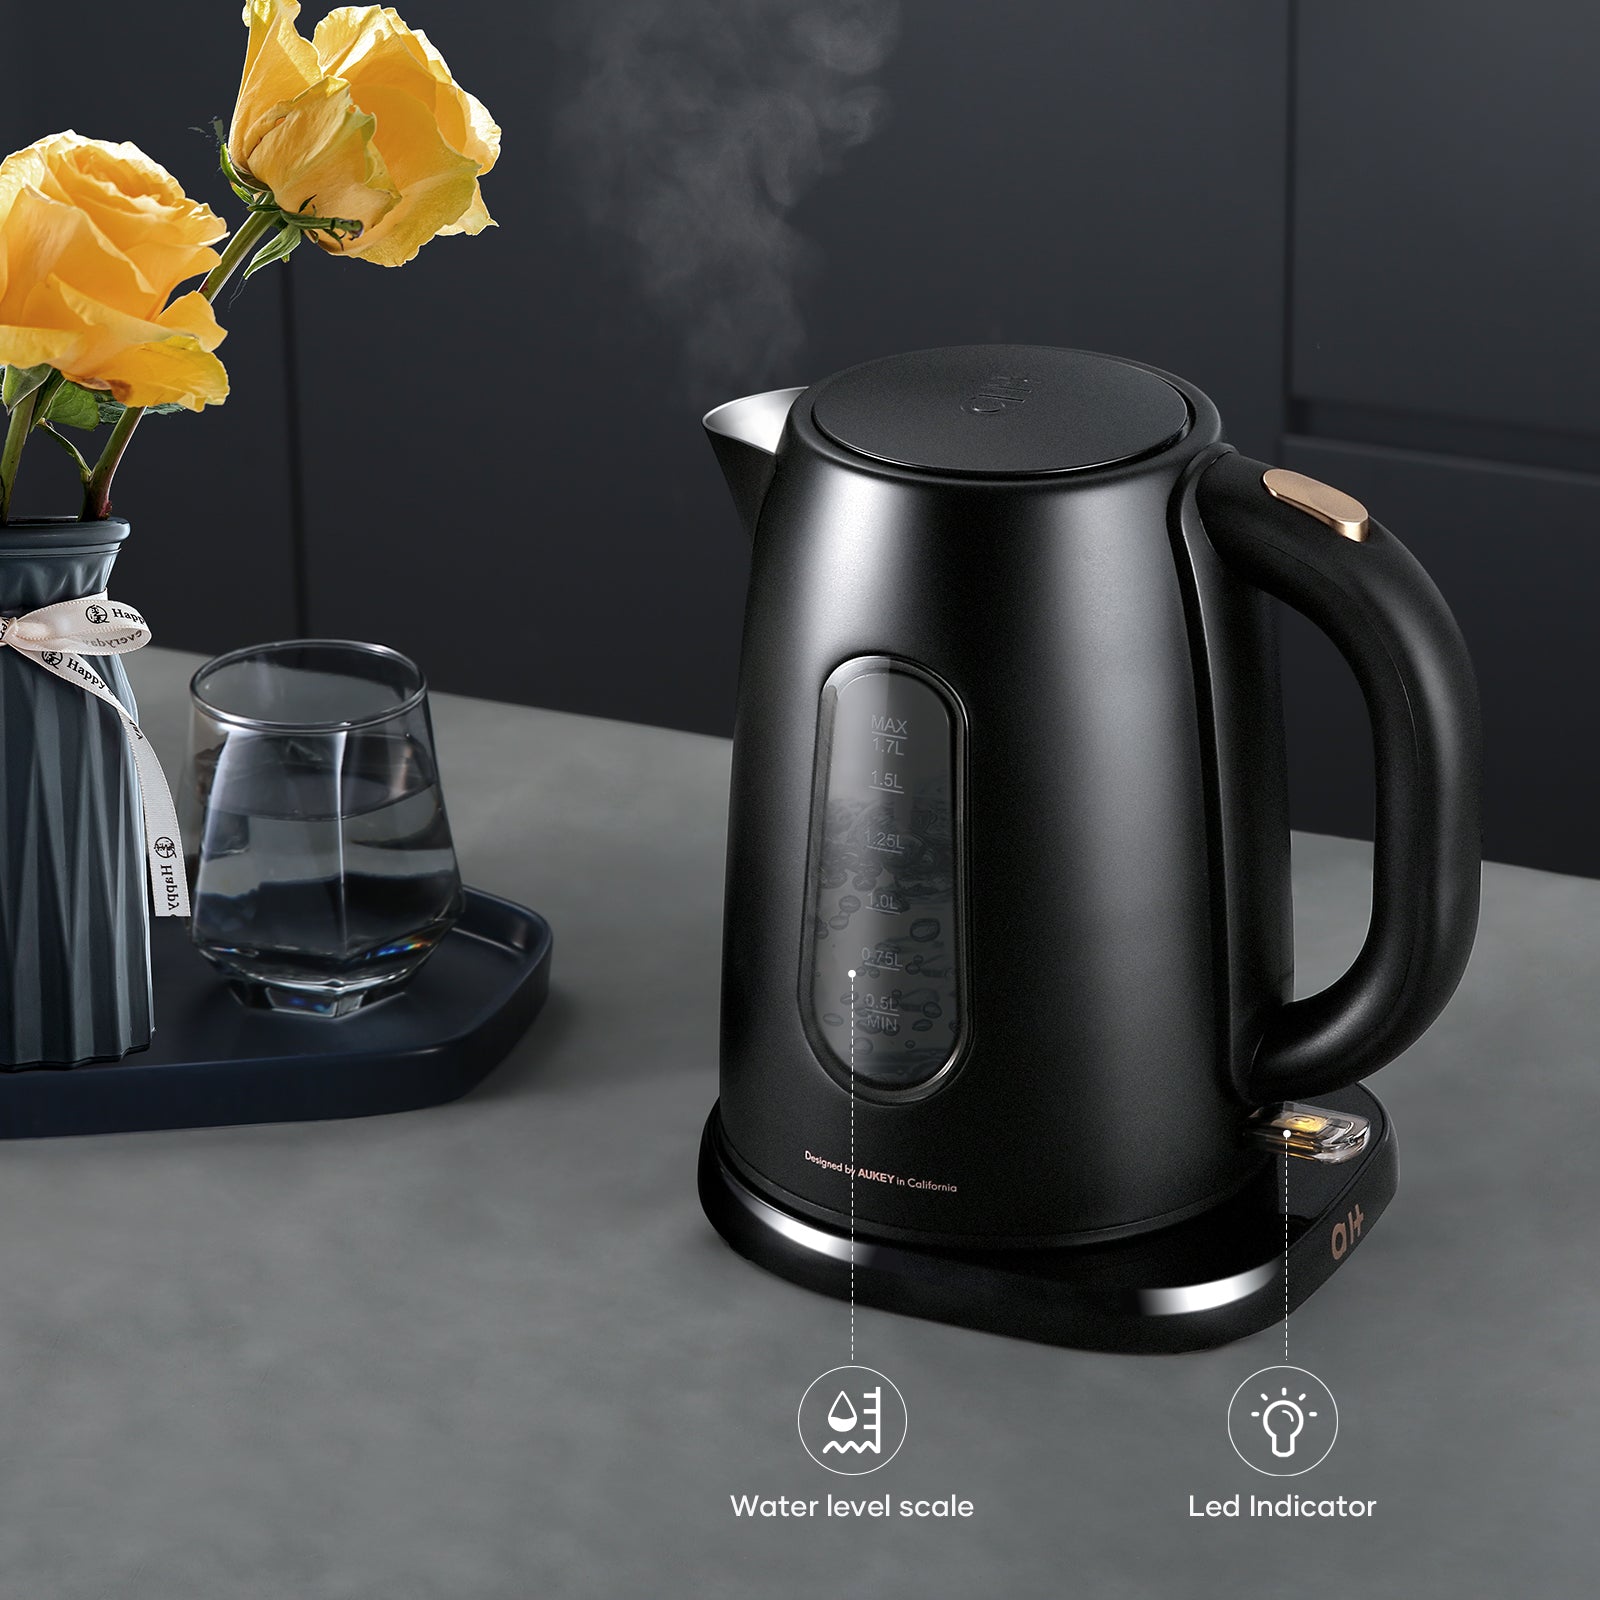 Load image into Gallery viewer, Electric Kettle for Boiling Water, 1.7L, 100% Stainless Steel Electric Tea Kettle with Overheating &amp; Dry-Boiling Protection &amp; Auto Shut-Off &amp; Anti-Scalding Exterior &amp; Cool Touch- Black
